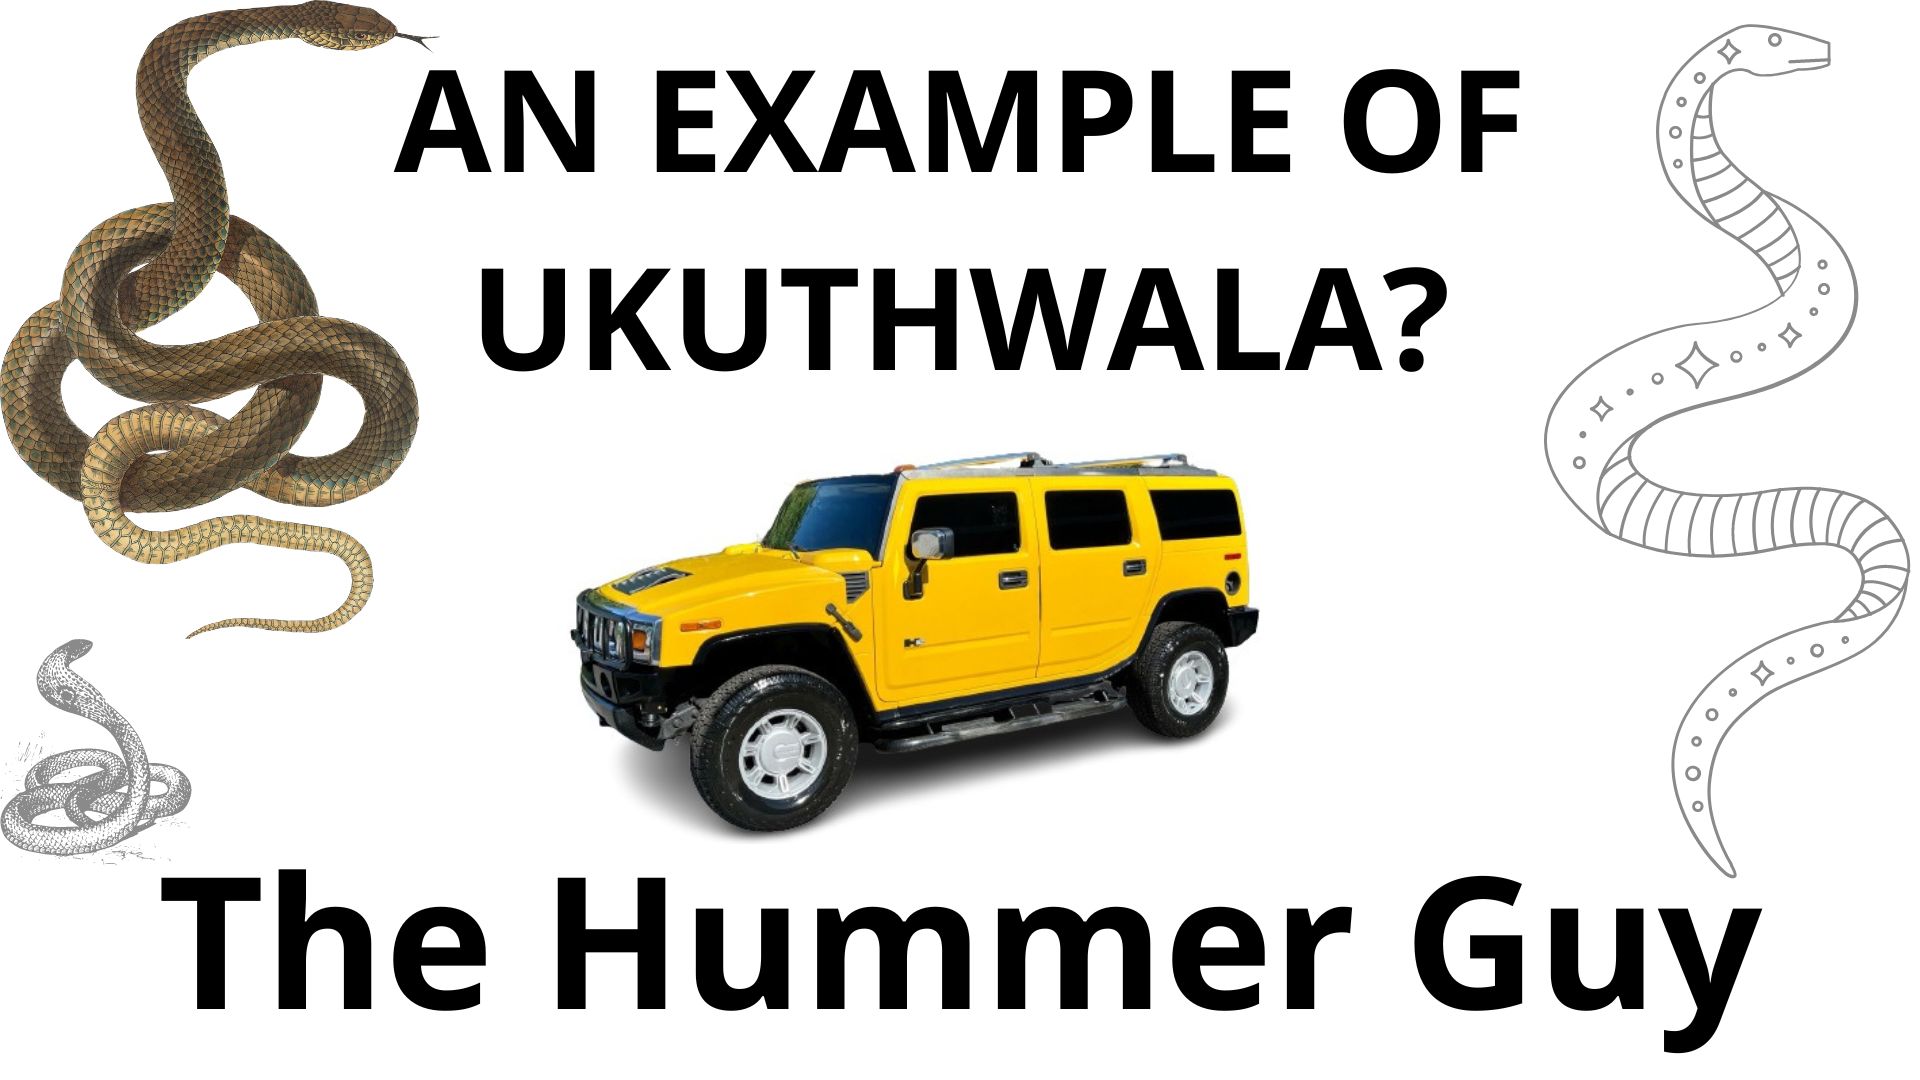 The Hummer Guy